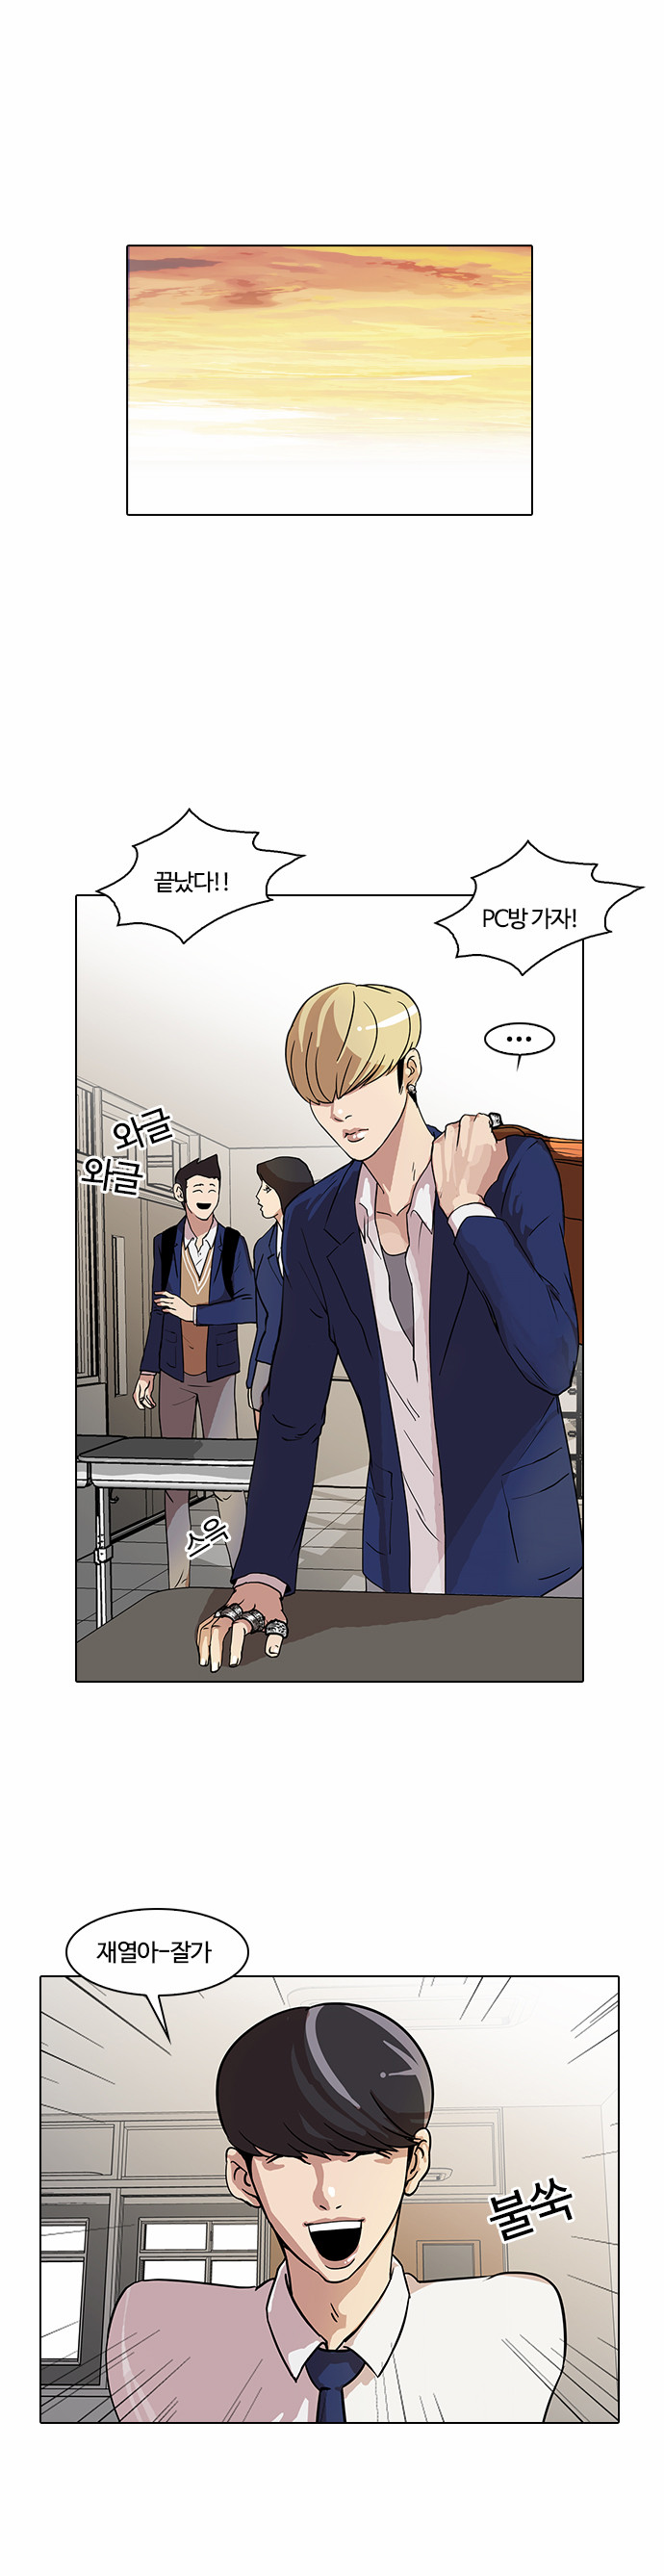 Lookism - Chapter 20 - Page 1